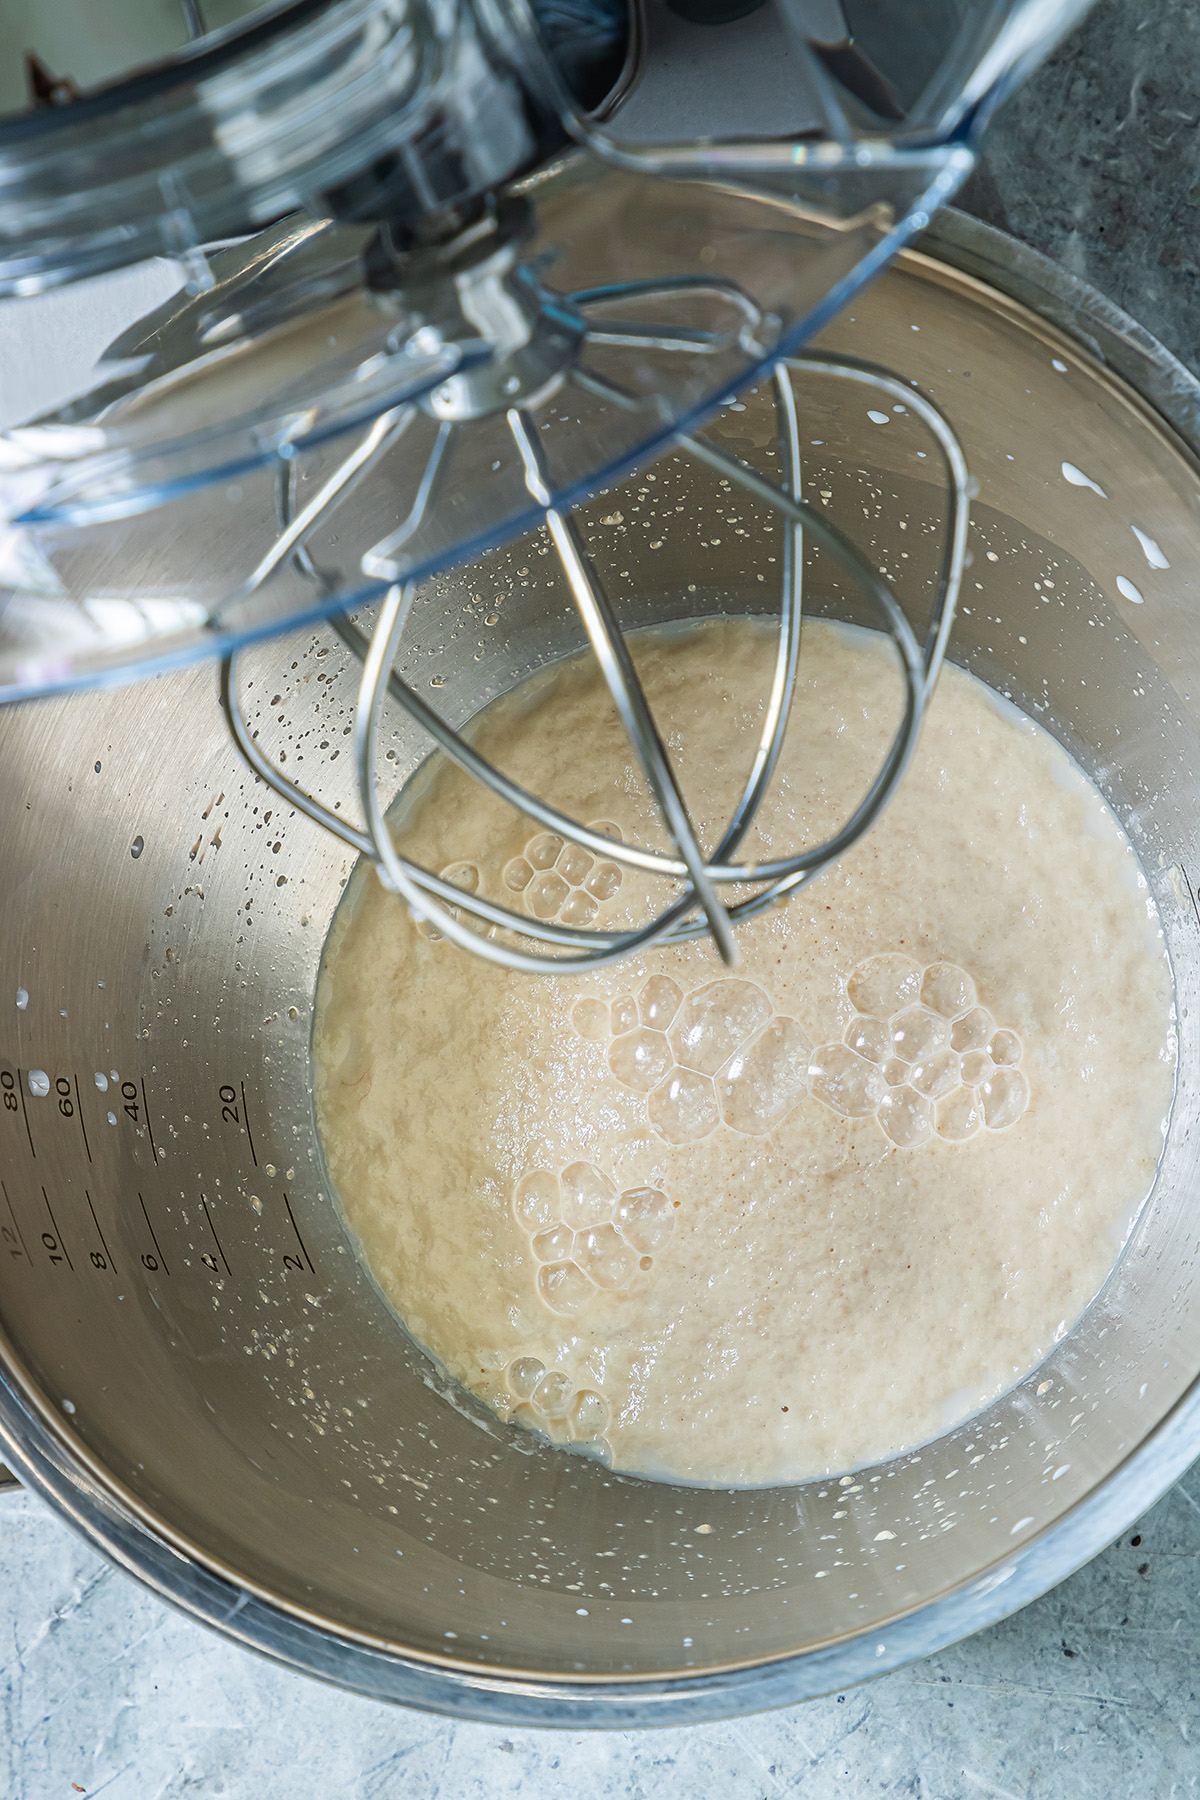 yeast and swater in a mixing bowl